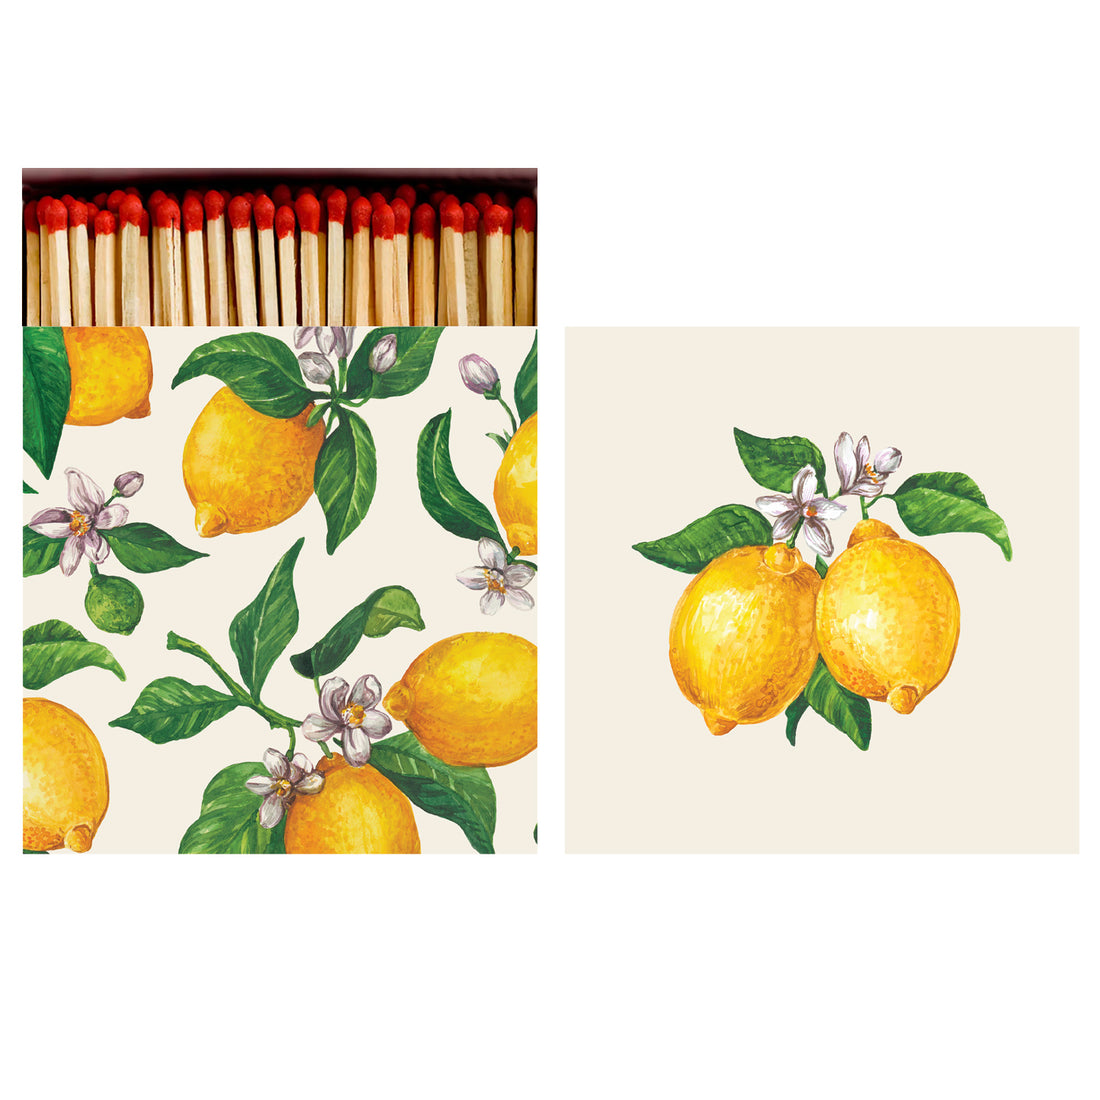 Two sides of a square match box, the left of which is open slightly to reveal the matches inside. The artwork on one side is a pair of vibrant yellow lemons with white blooms and green leaves suspended in the center, and the other side is a wall-to-wall pattern of lemons, blooms and leaves scattered on the cream background..